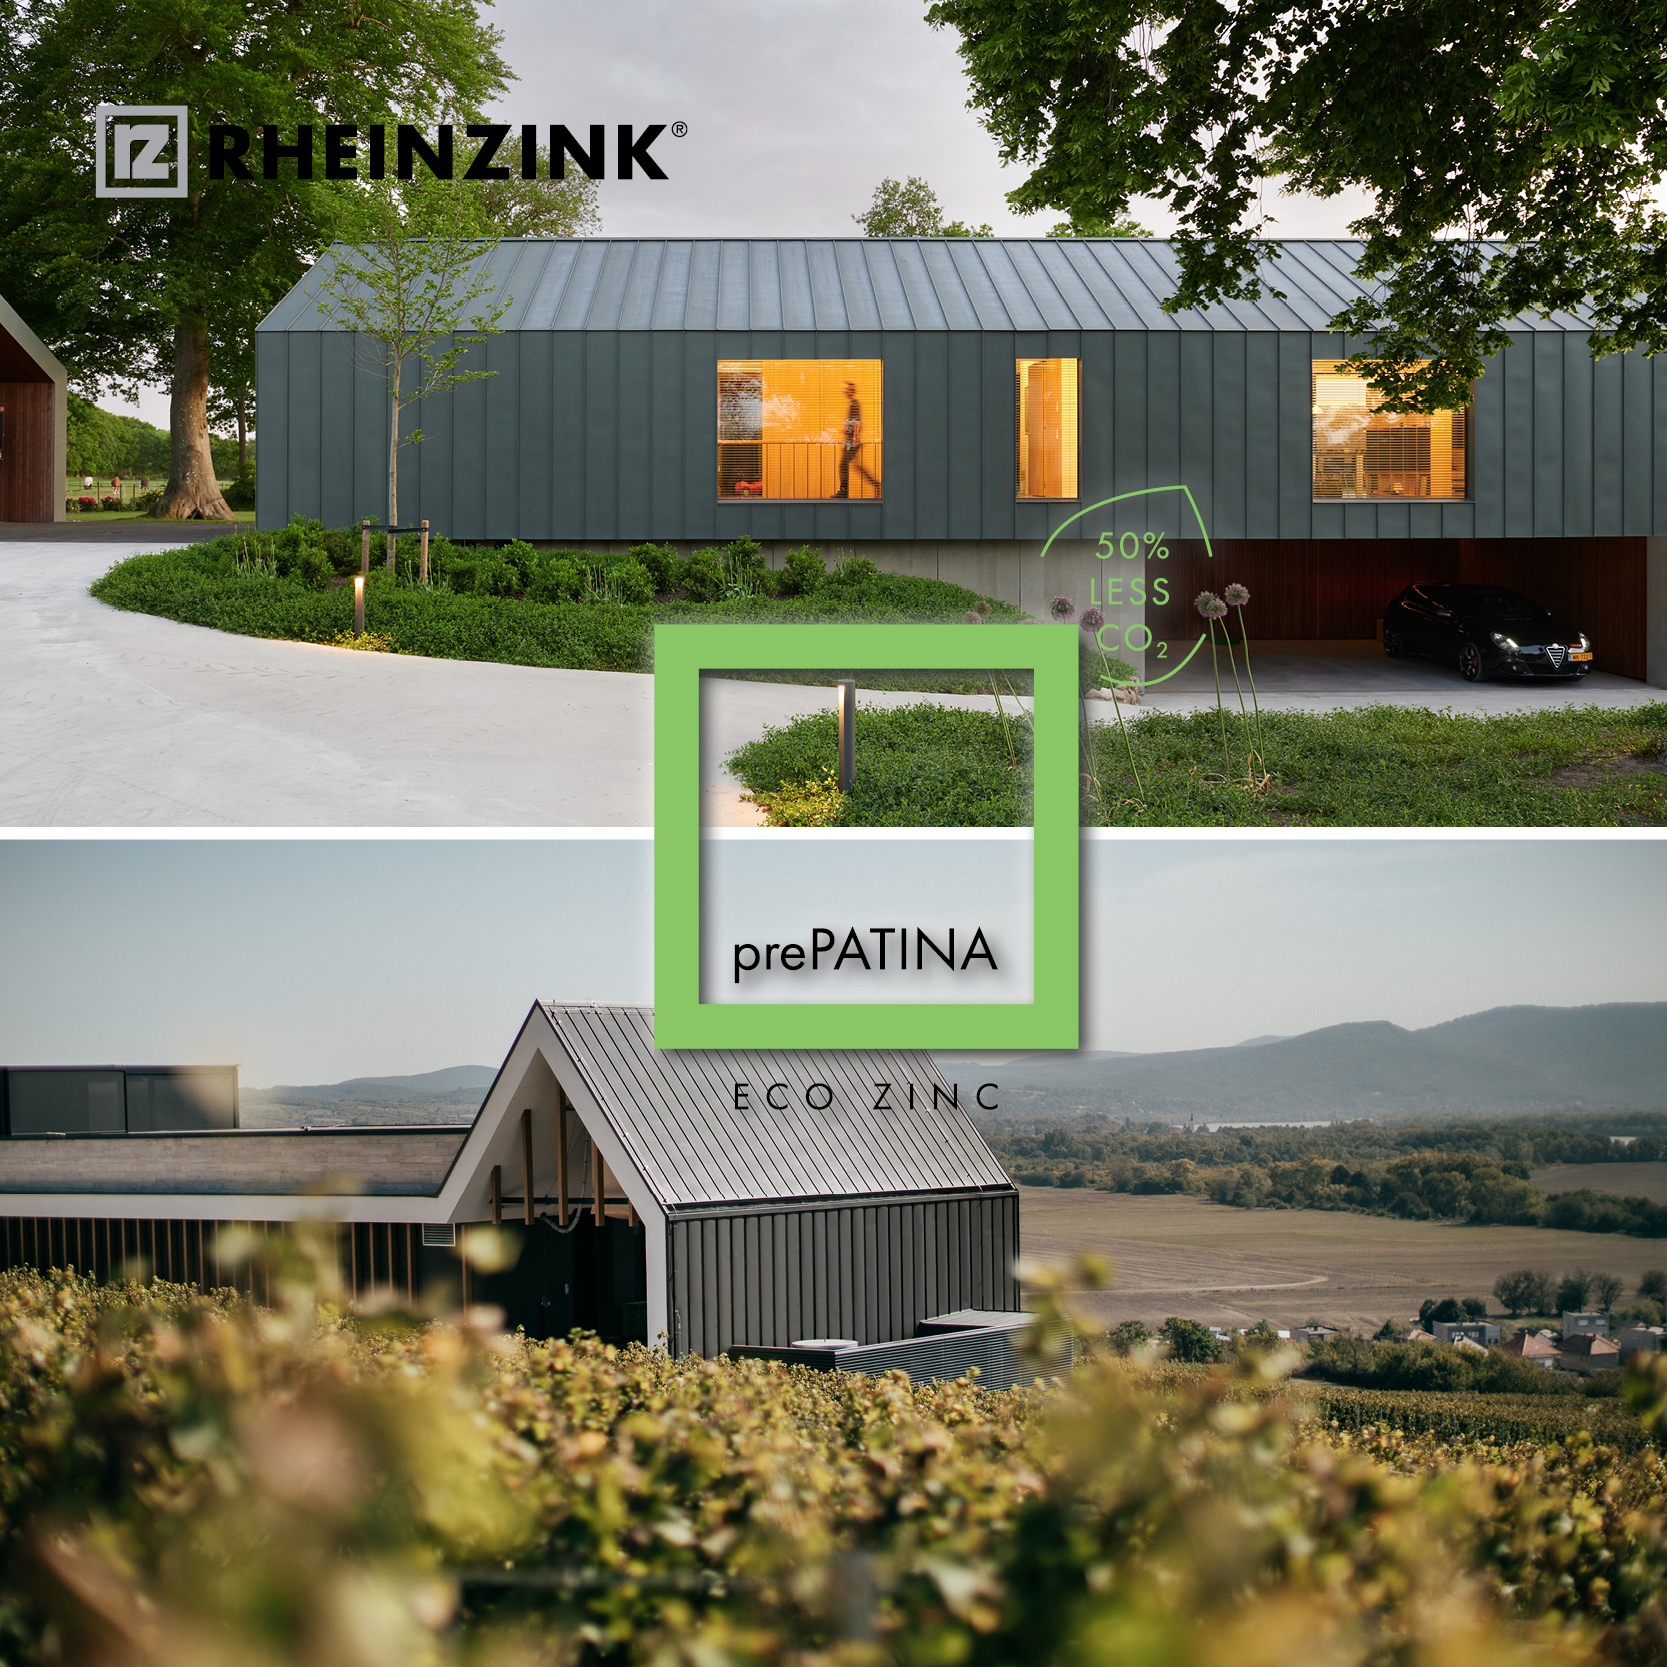 RHEINZINK-prePATINA ECO ZINC material now made with 50% less CO2